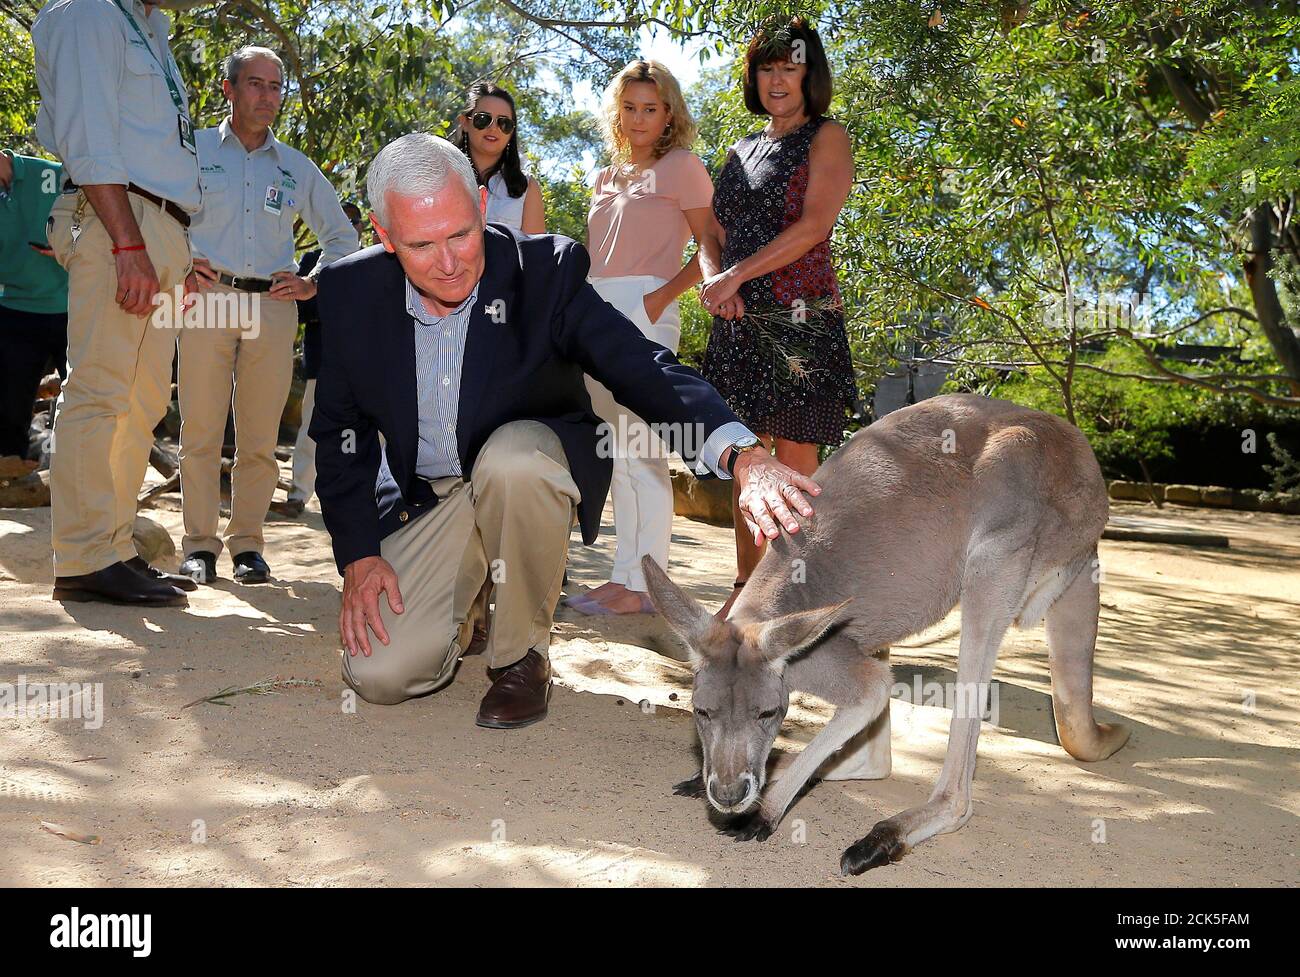 U.S. Vice President Mike Pence pats a kangaroo called Penny as he visits Taronga Zoo with wife Karen and daughters Charlotte and Audrey in Sydney, Australia, April 23, 2017. REUTERS/Jason Reed Stock Photo